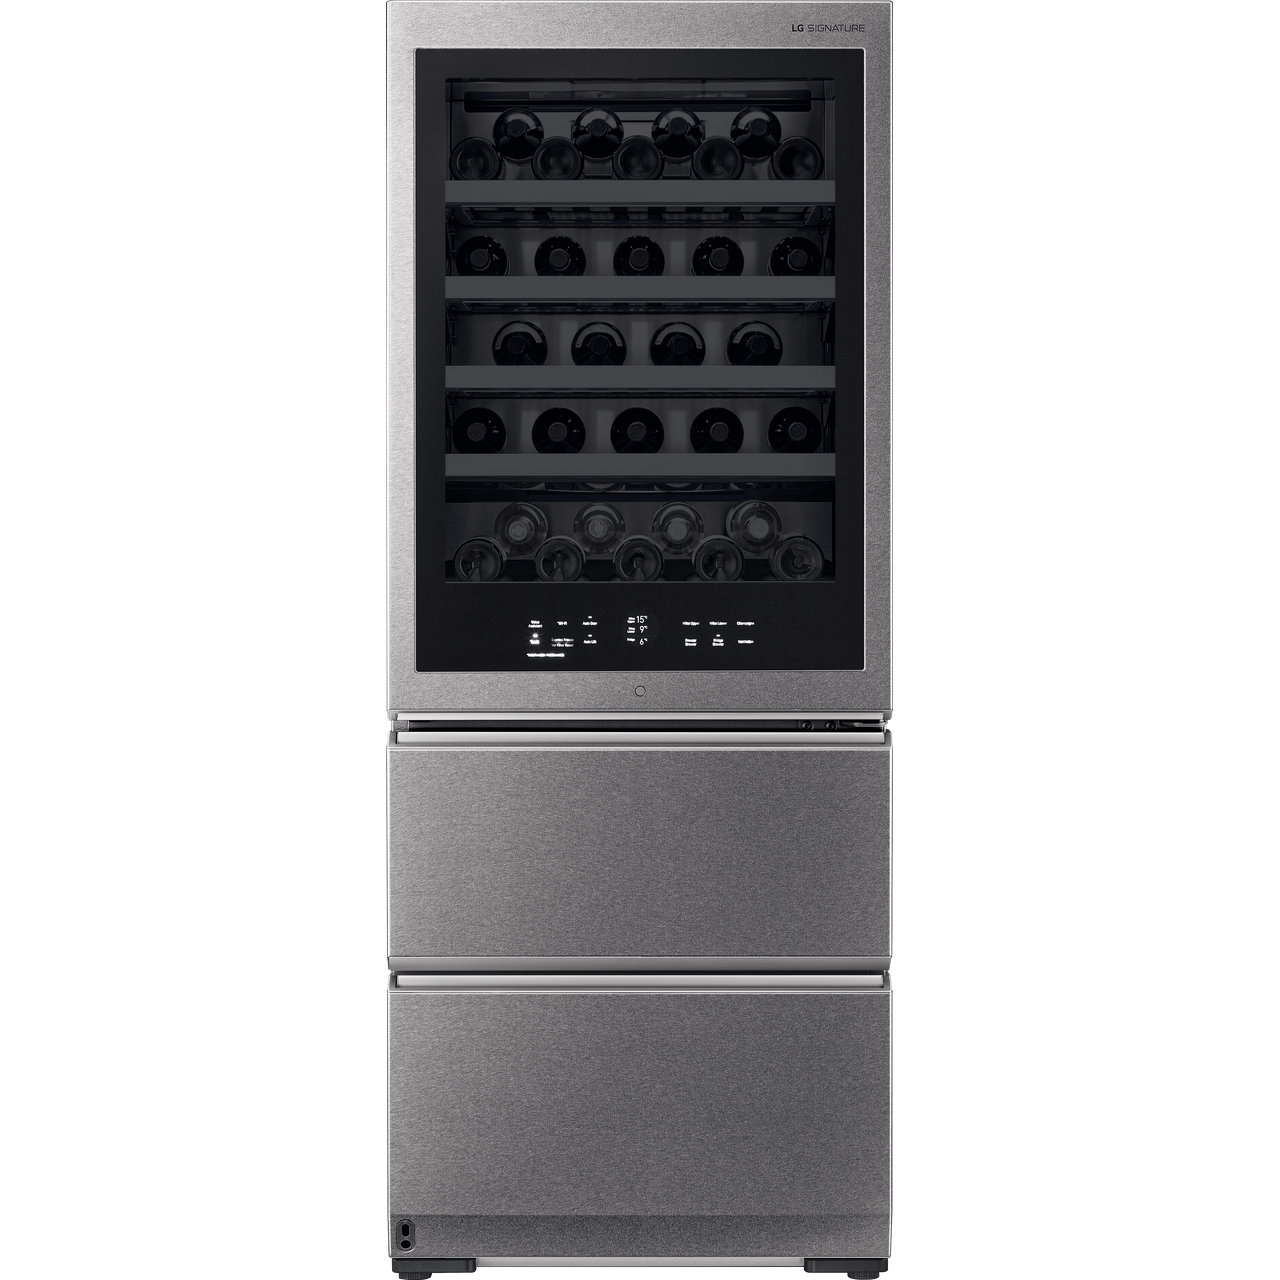 LG SIGNATURE LSR200W Wine Cooler Review